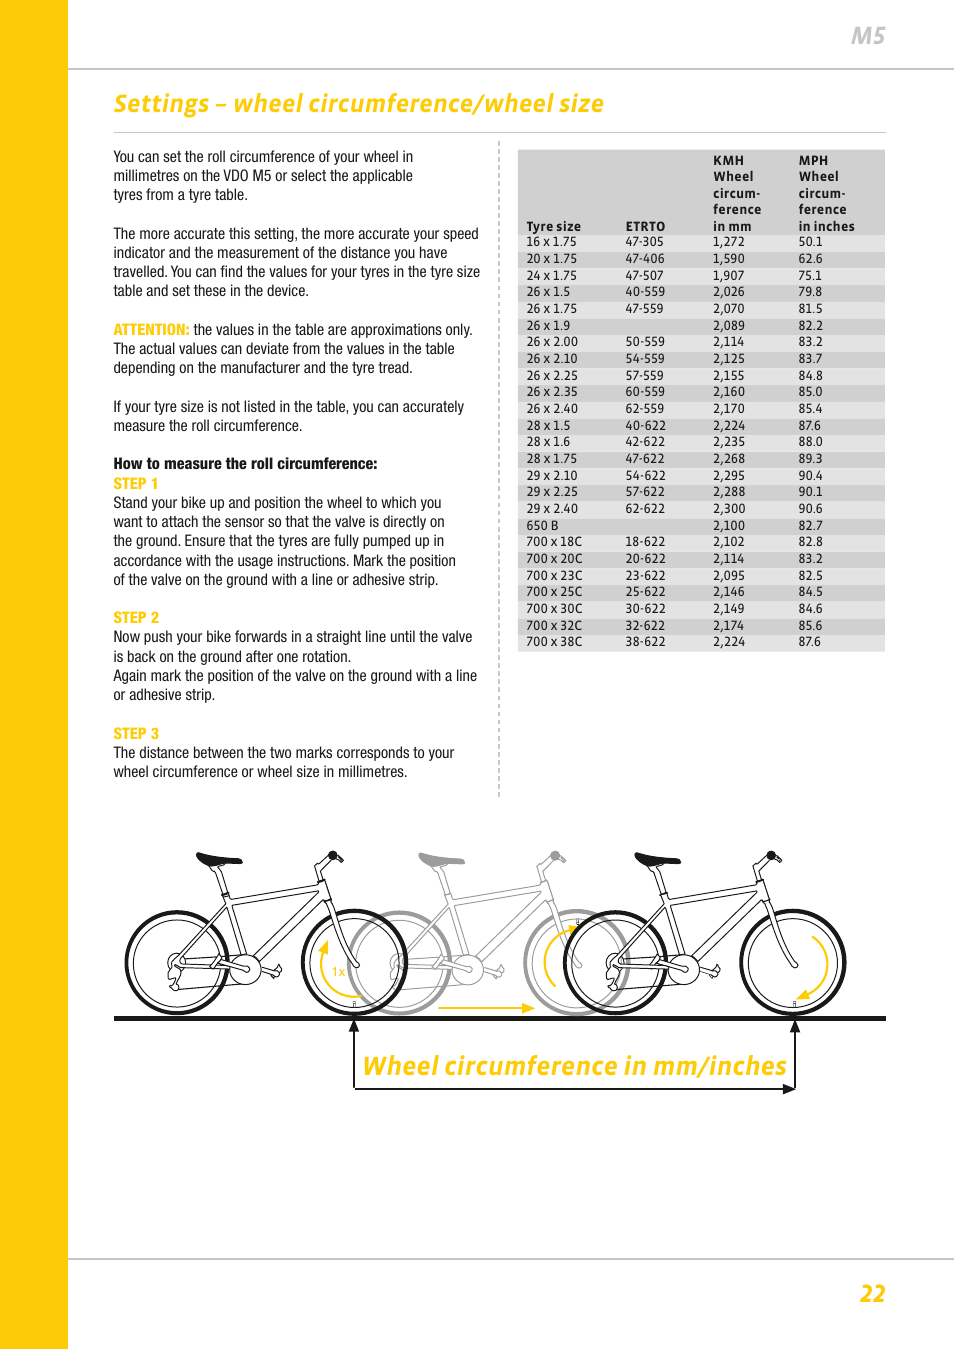 Wheel circumference in mm/inches, 22 m5, Settings – wheel circumference/ wheel size | VDO M5WL User Manual | Page 22 / 61